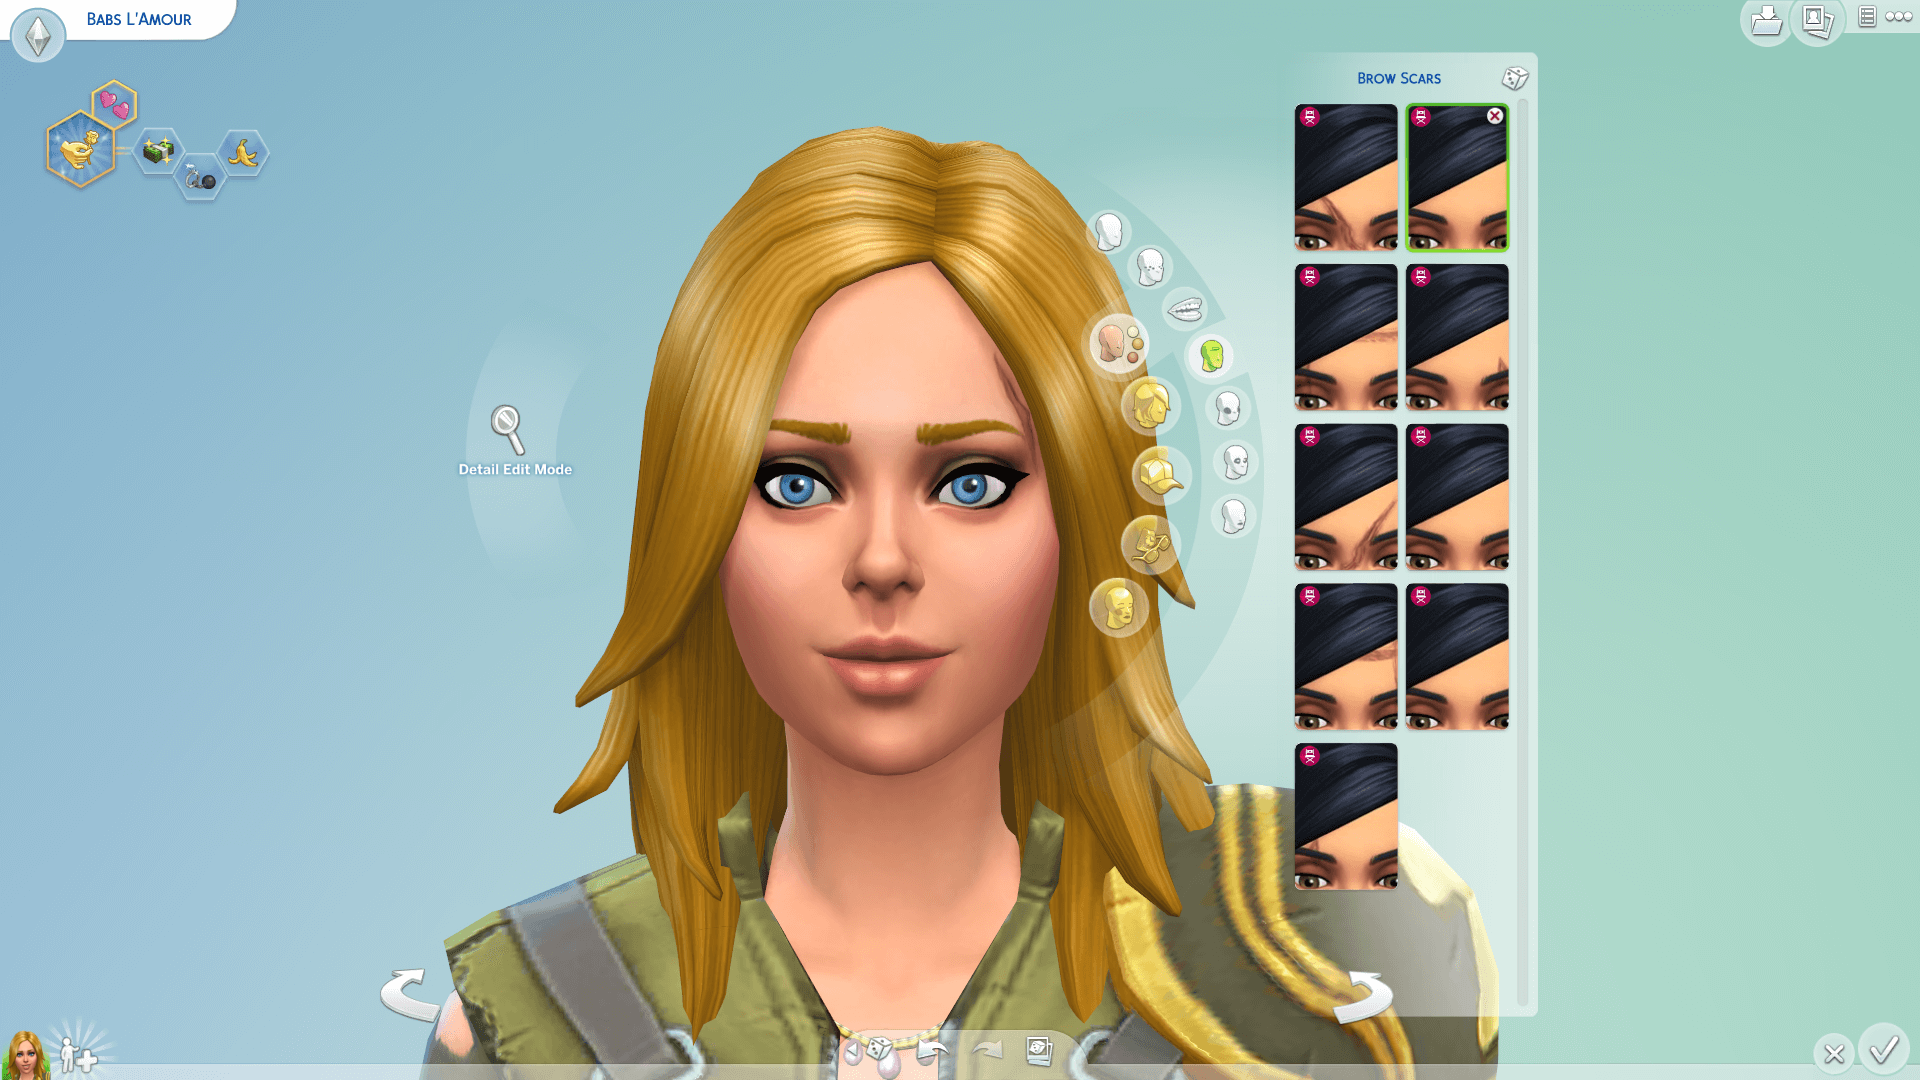 The Sims 4 Get Famous: Gold Teeth, Scars, and CAS.